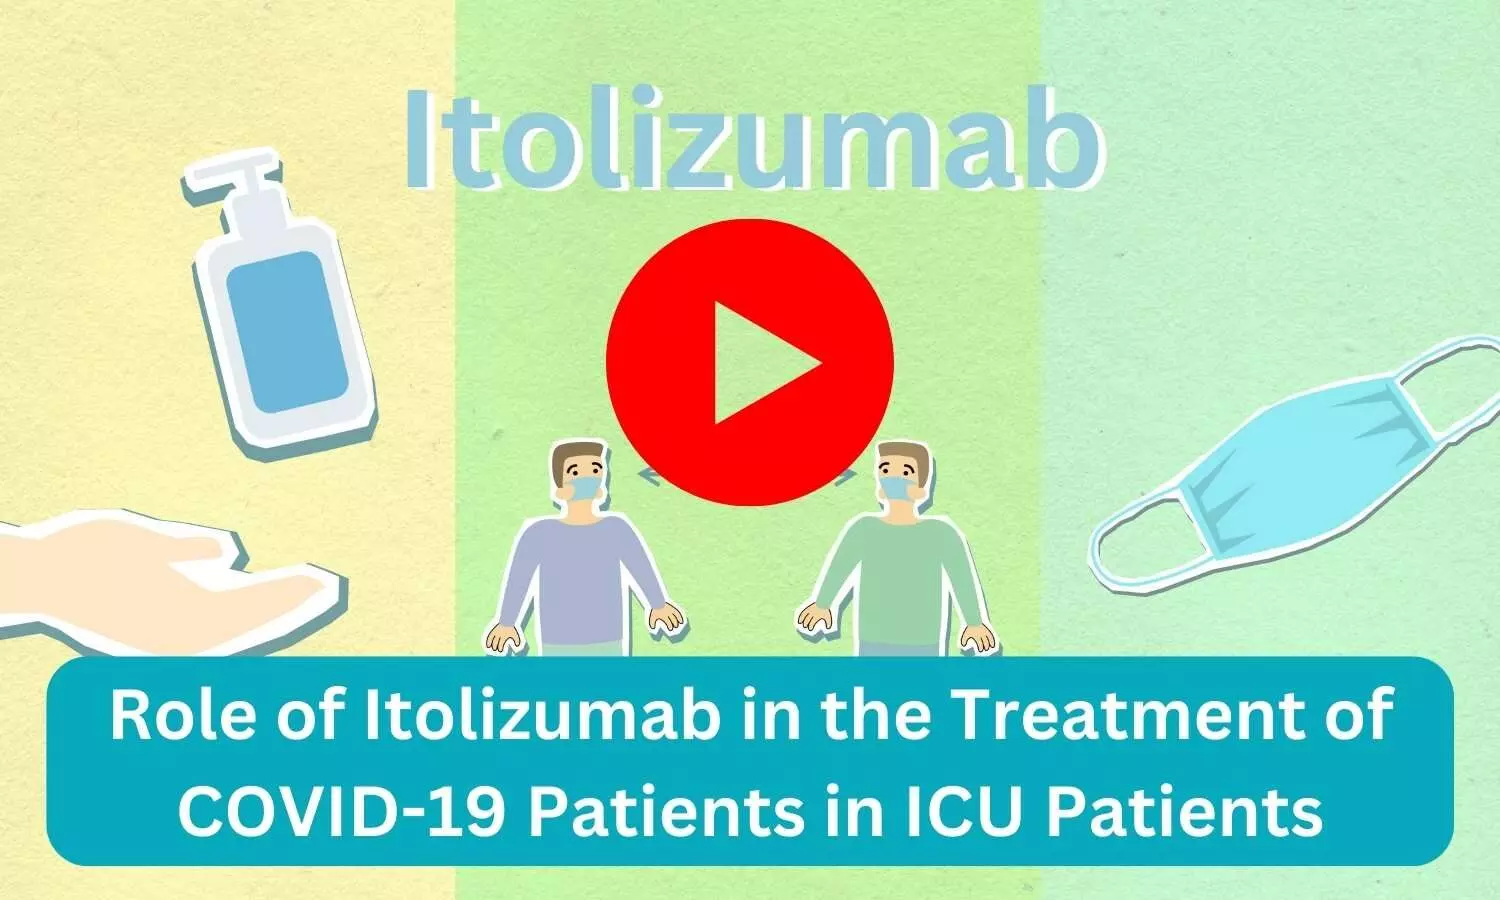 Role of Itolizumab in the Treatment of COVID-19 Patients in ICU Patients